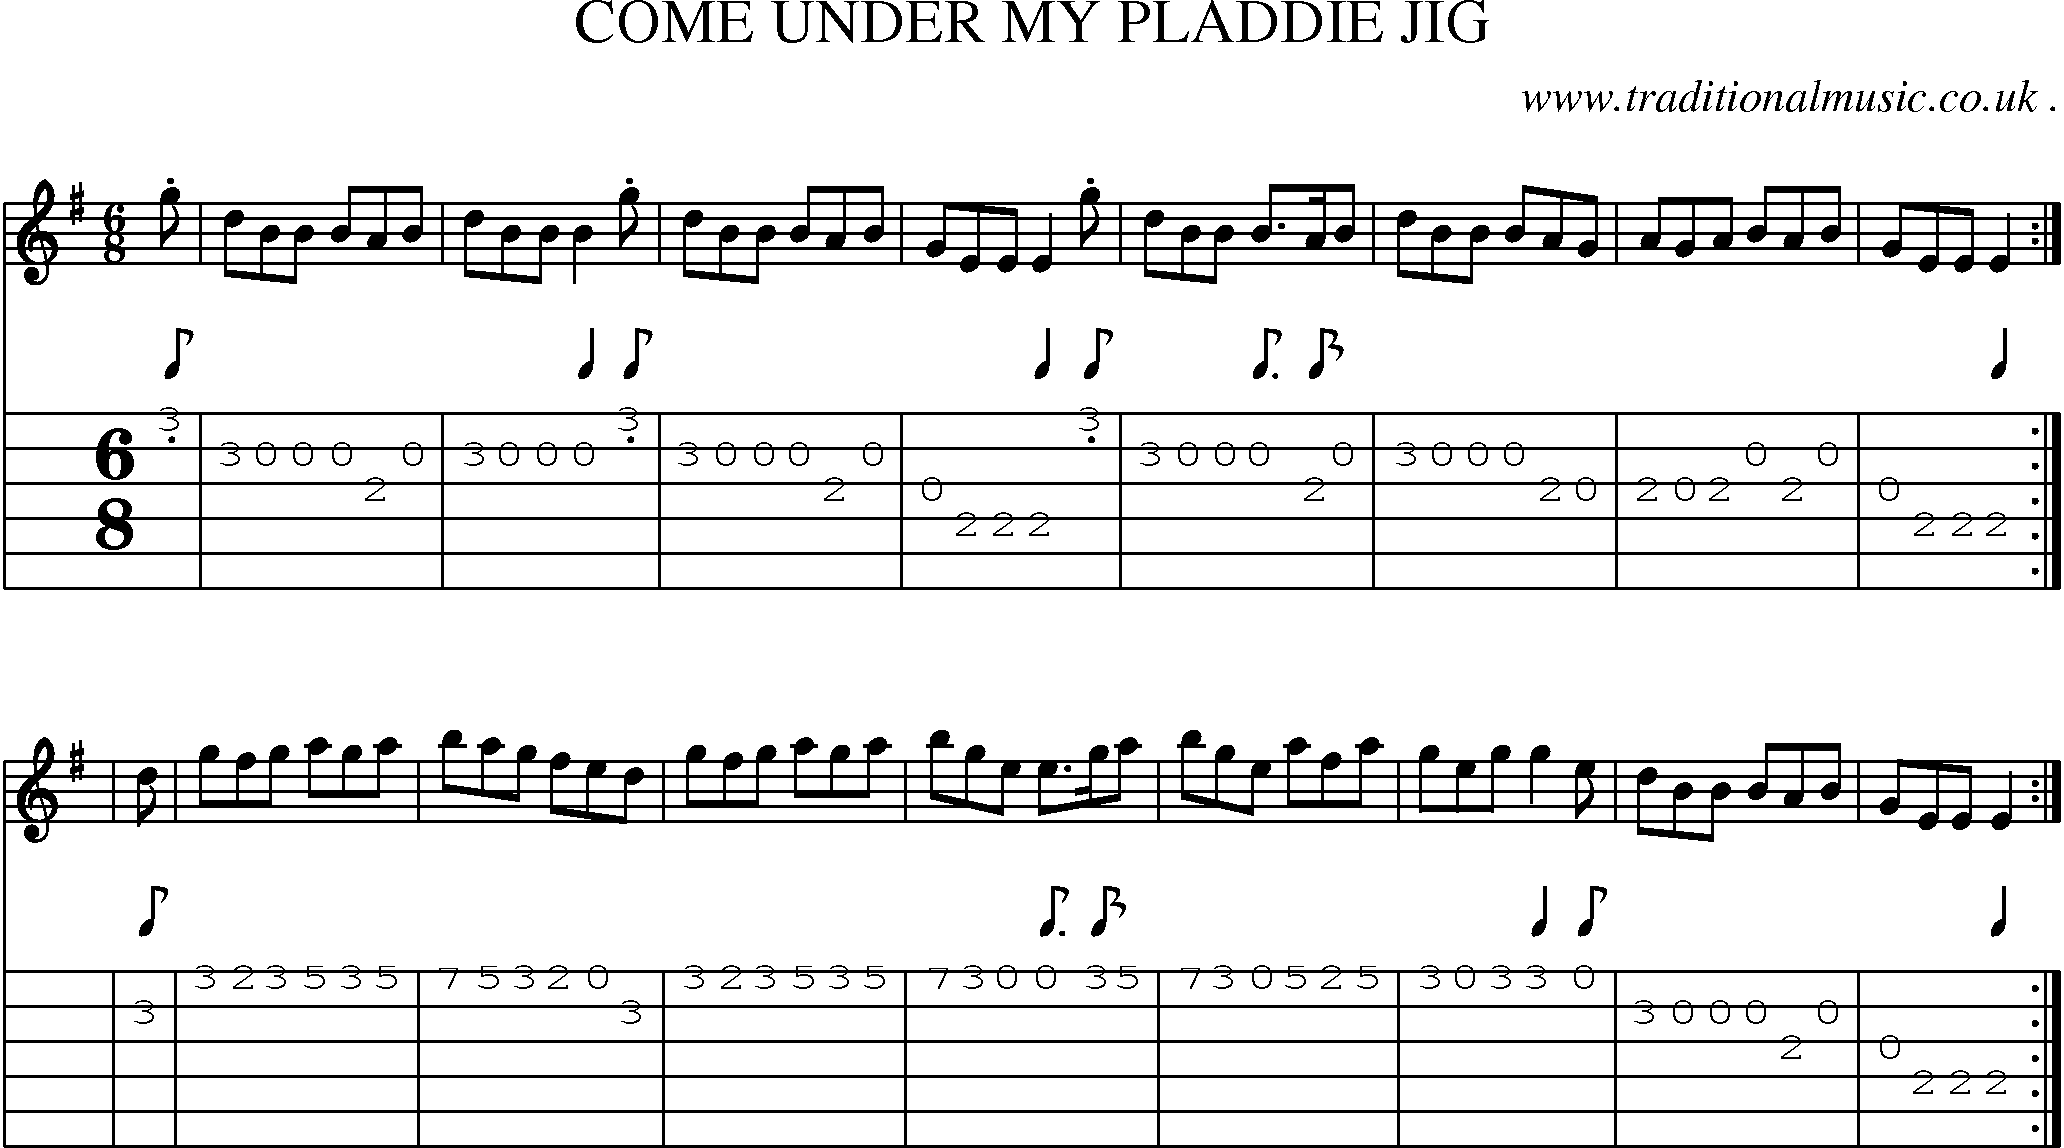 Sheet-Music and Guitar Tabs for Come Under My Pladdie Jig